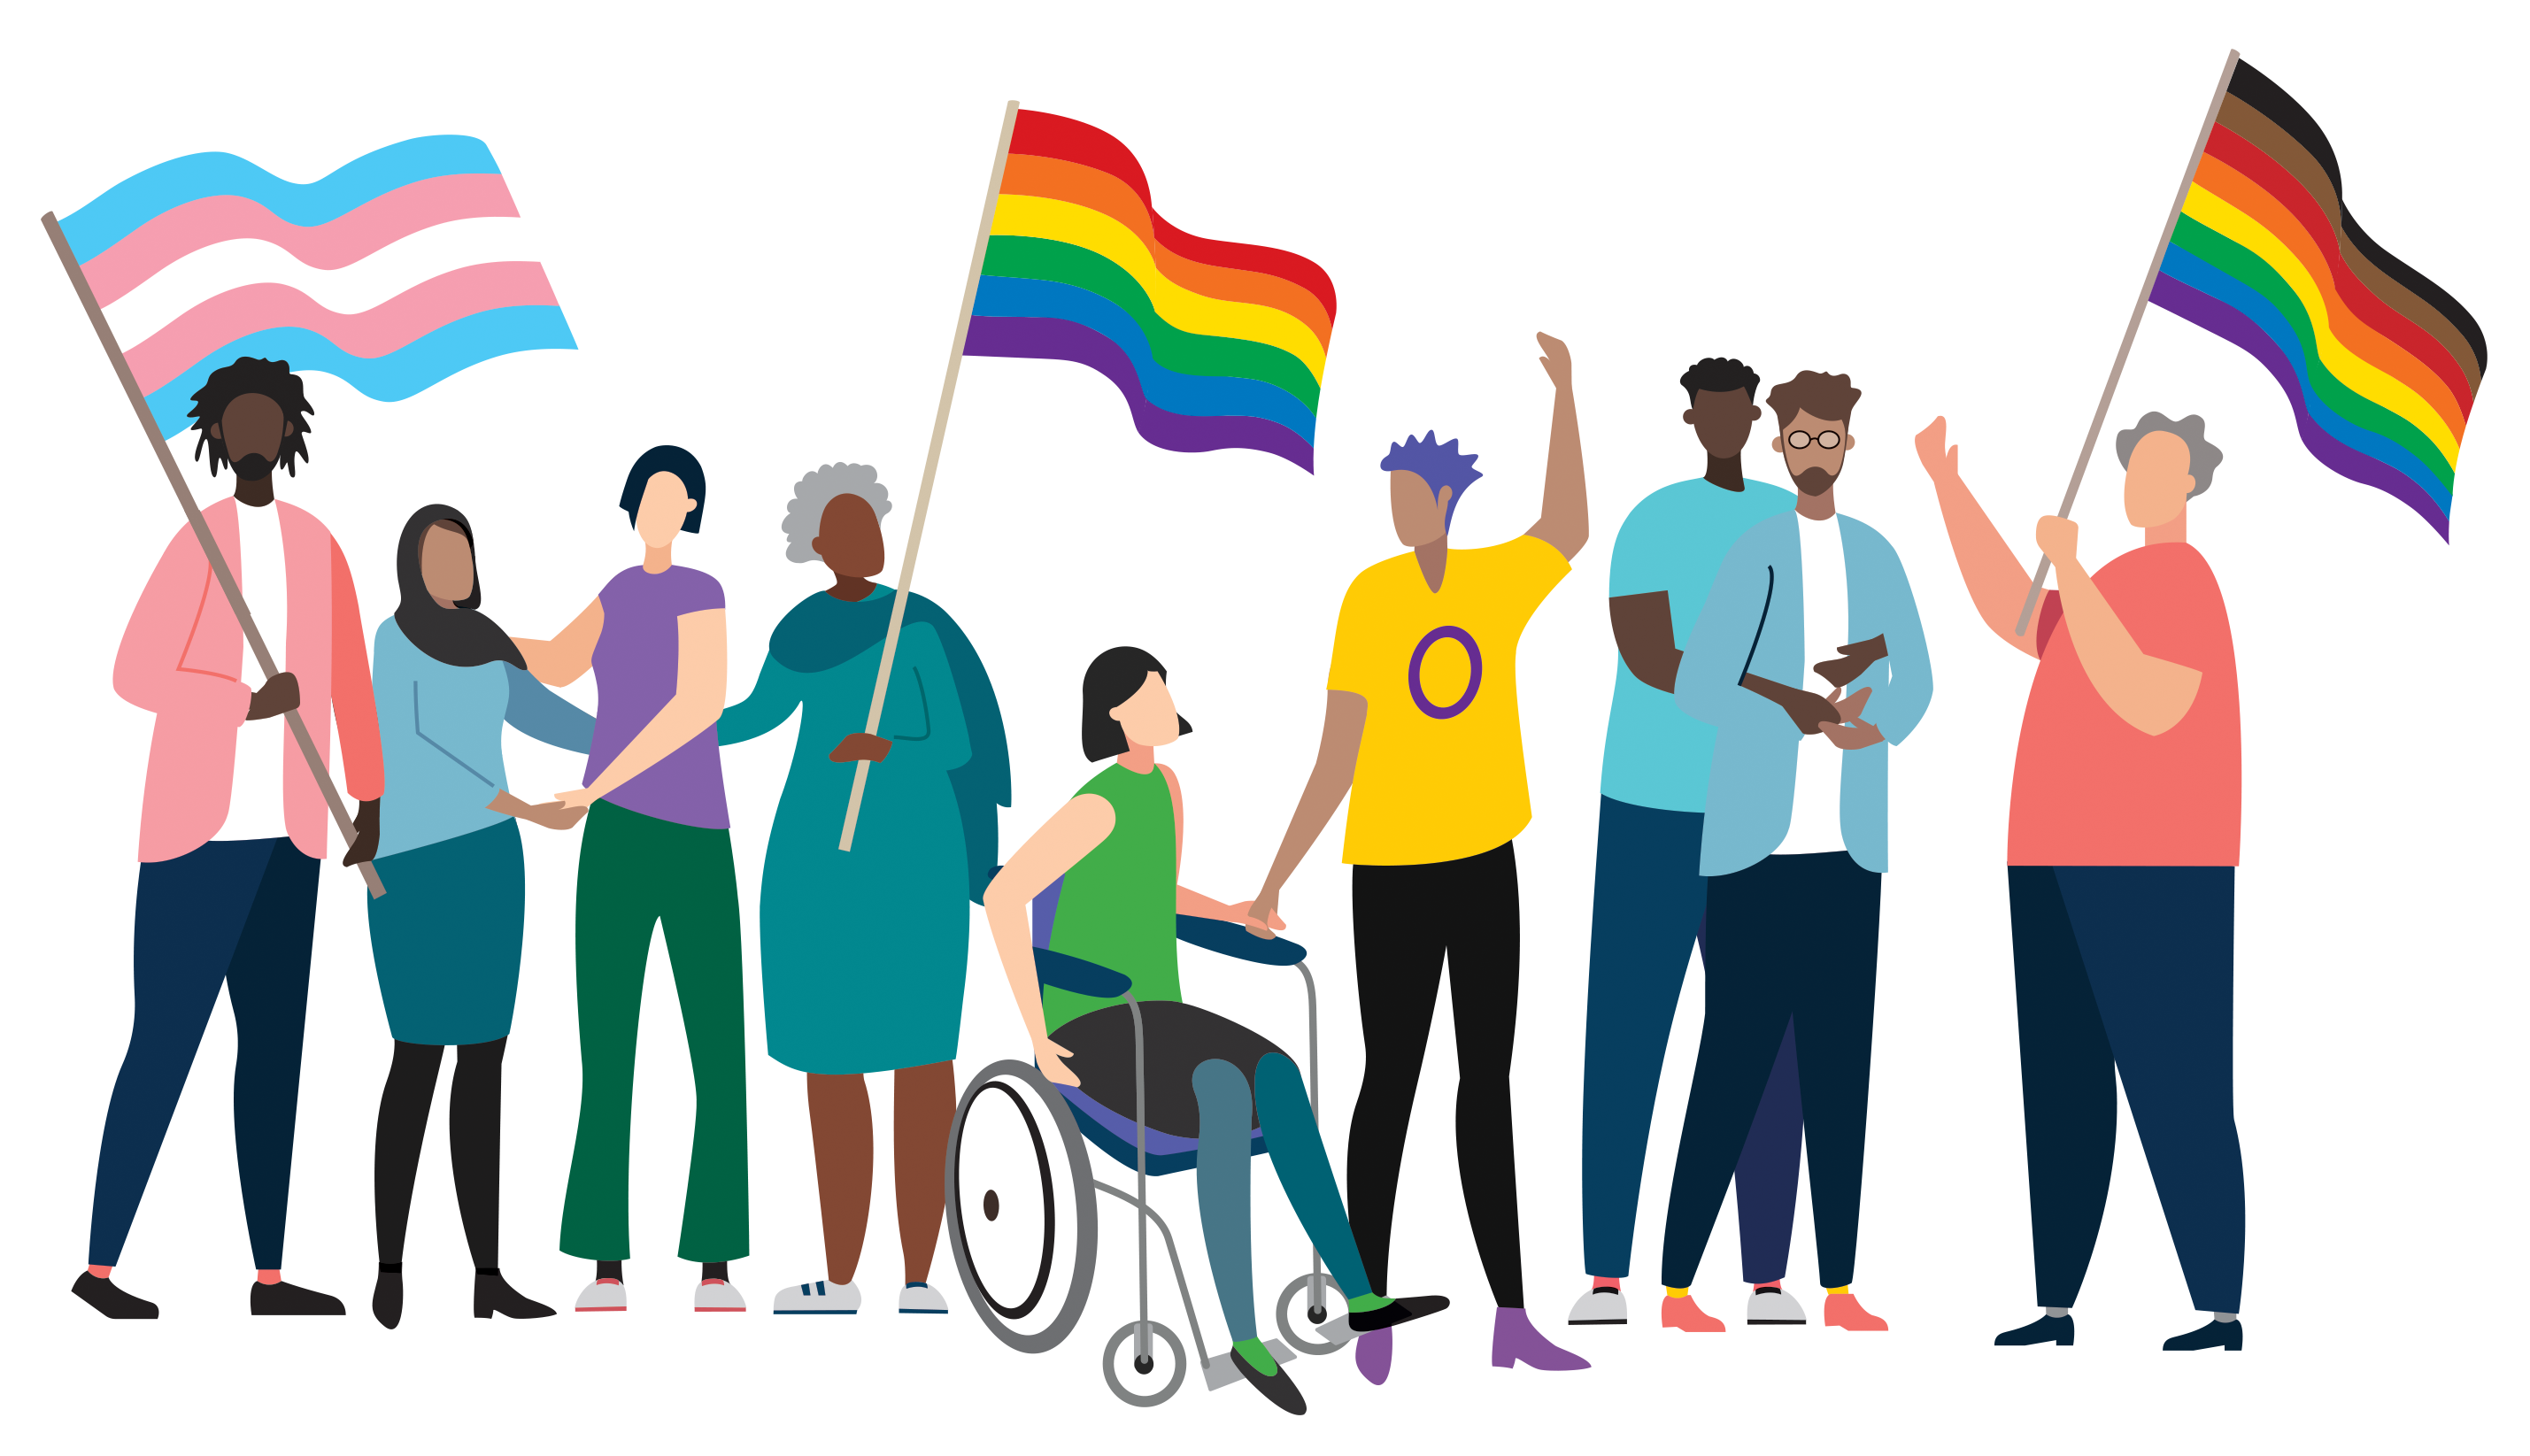 Stylised illustration of a group of diverse people holding rainbow, trans, and intersex pride flags